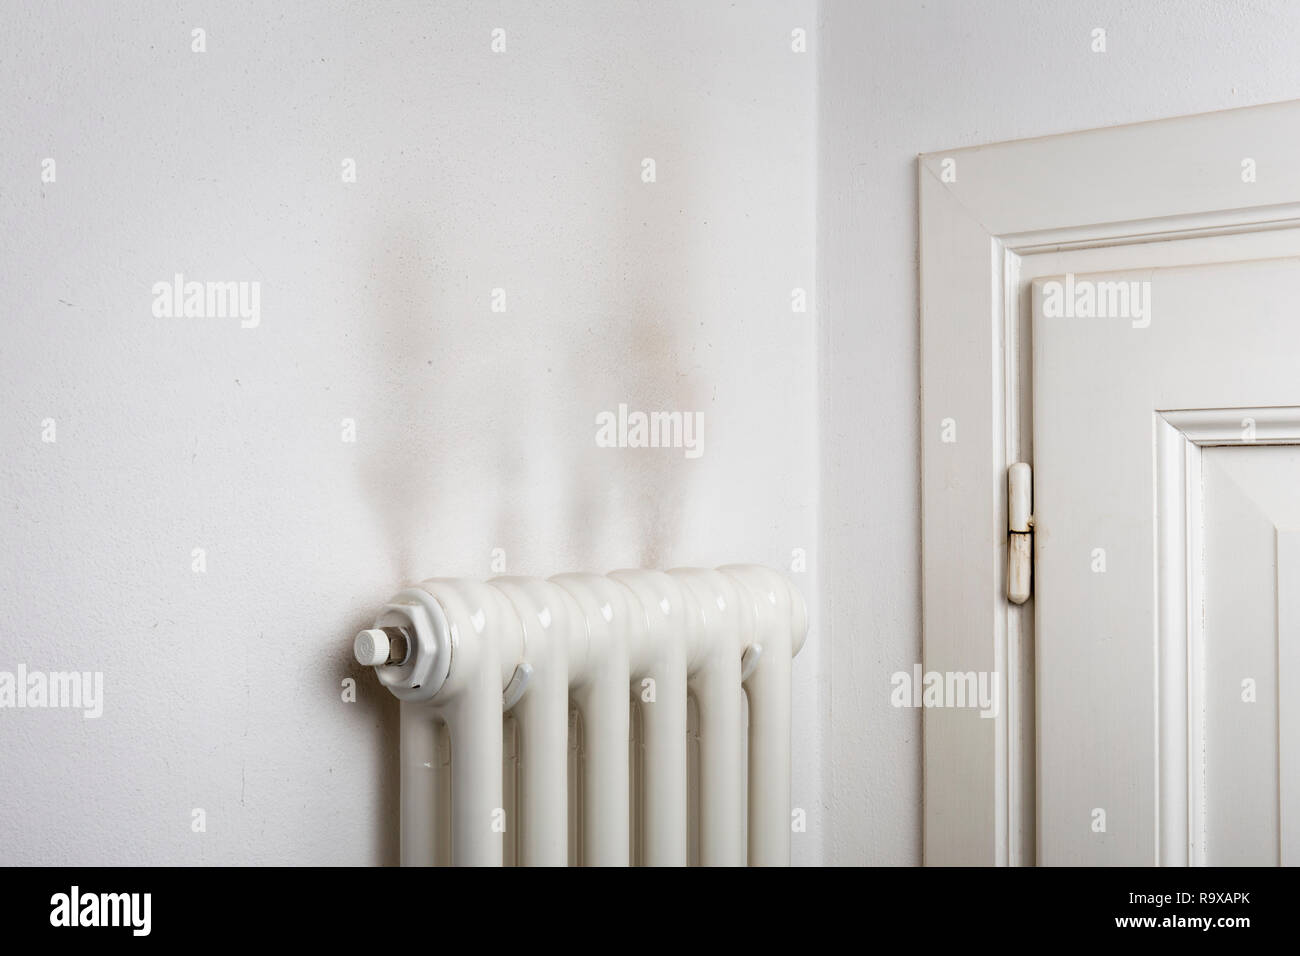 Dark stains on a wall above a household heat radiator Stock Photo